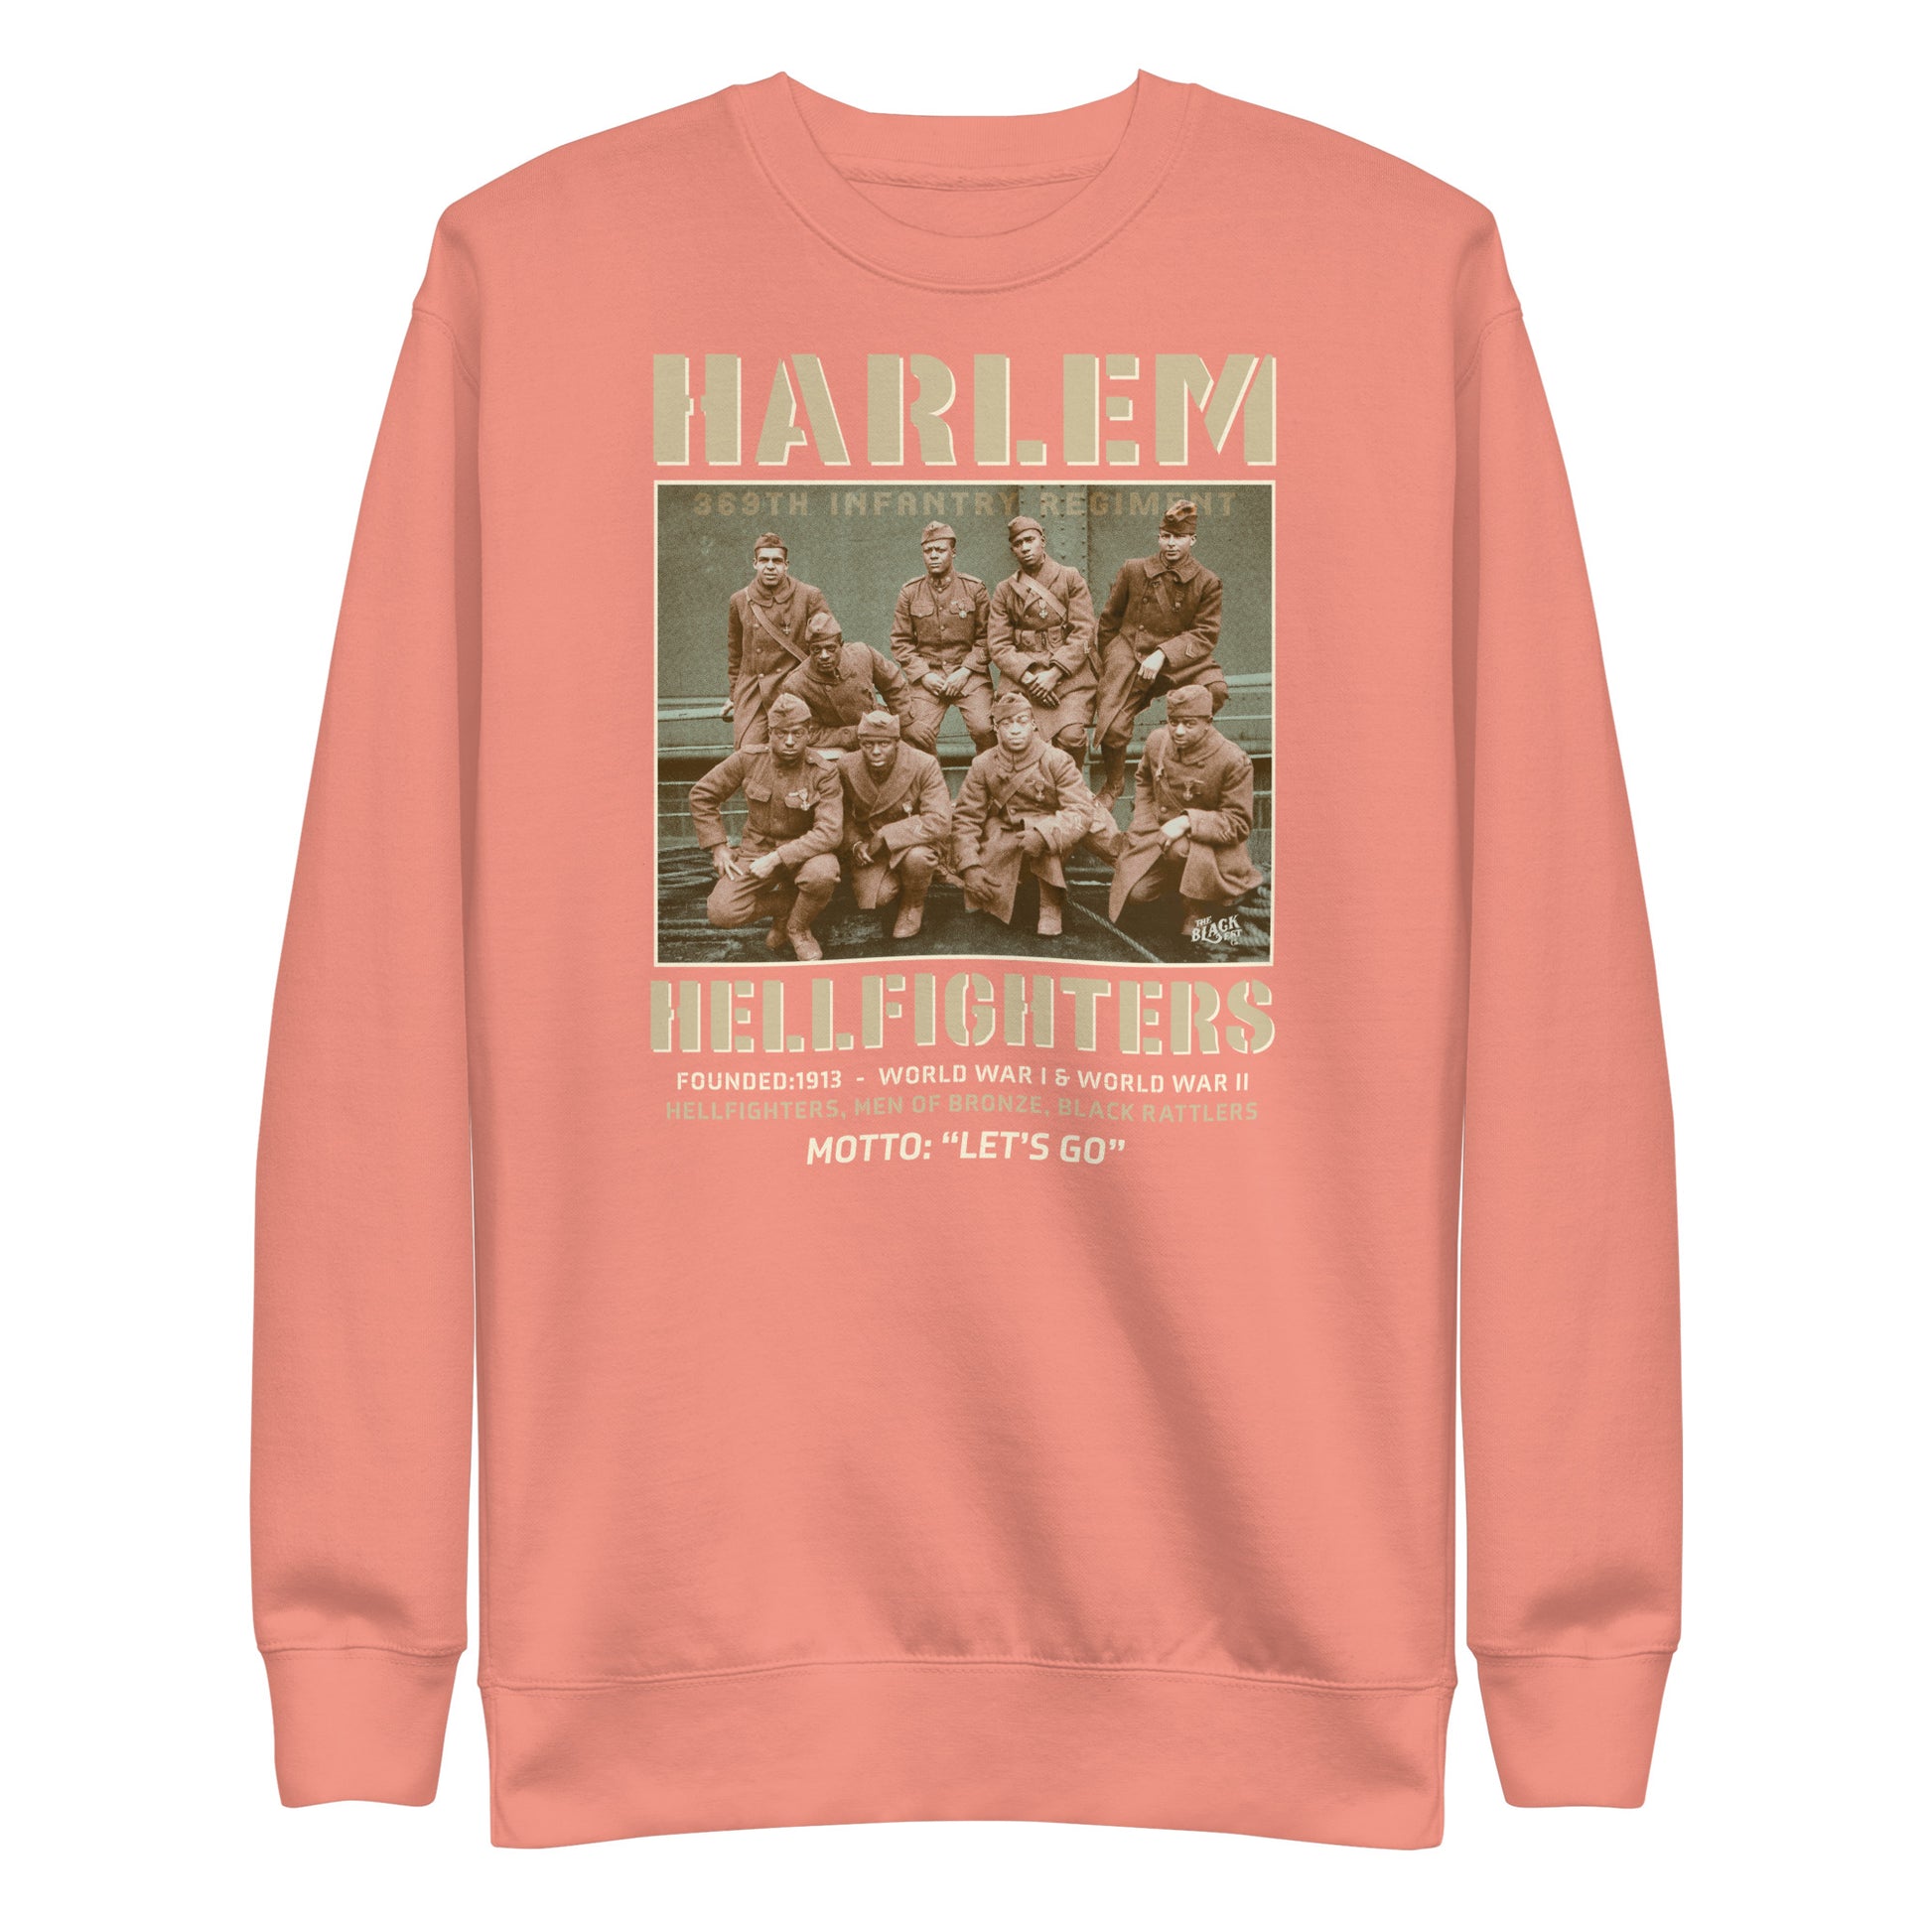 coral pink premium sweatshirt with a vintage image of wwi soldiers with text that reads harlem hellfighters